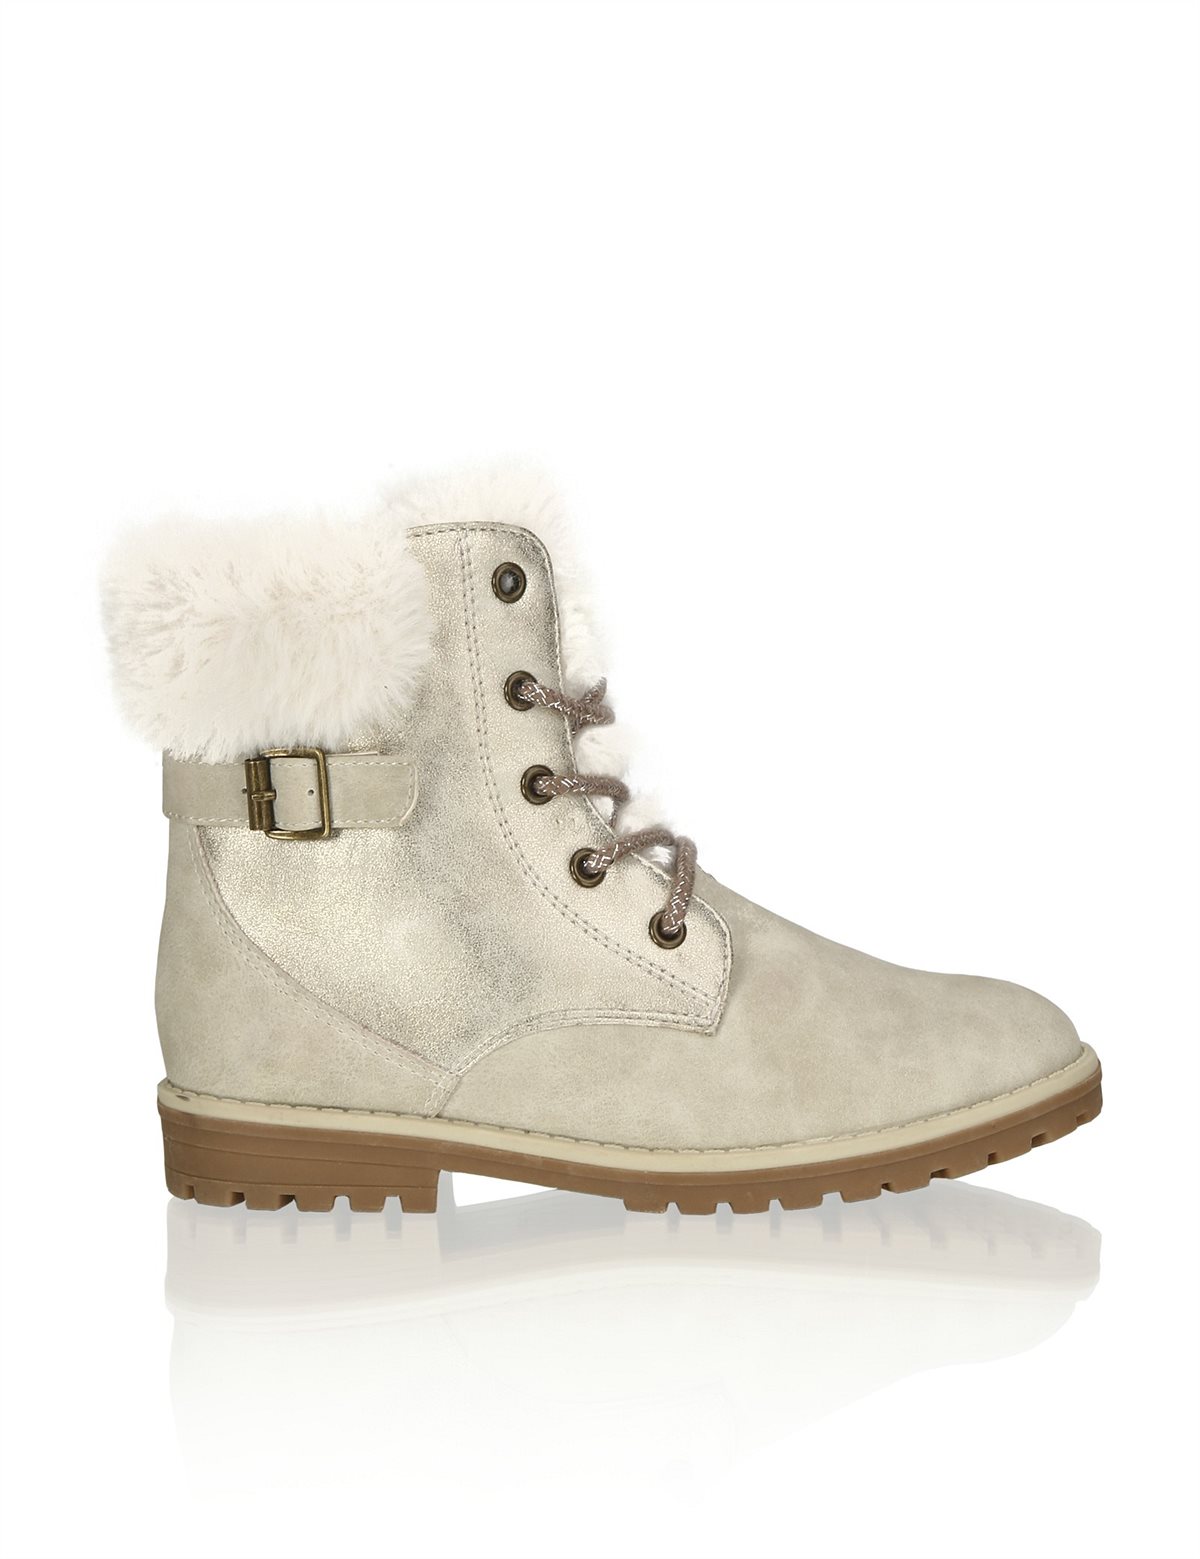 HUMANIC 10 Kids Funky Girls Boot ab EUR 39,95 ab Ende August 3623504725